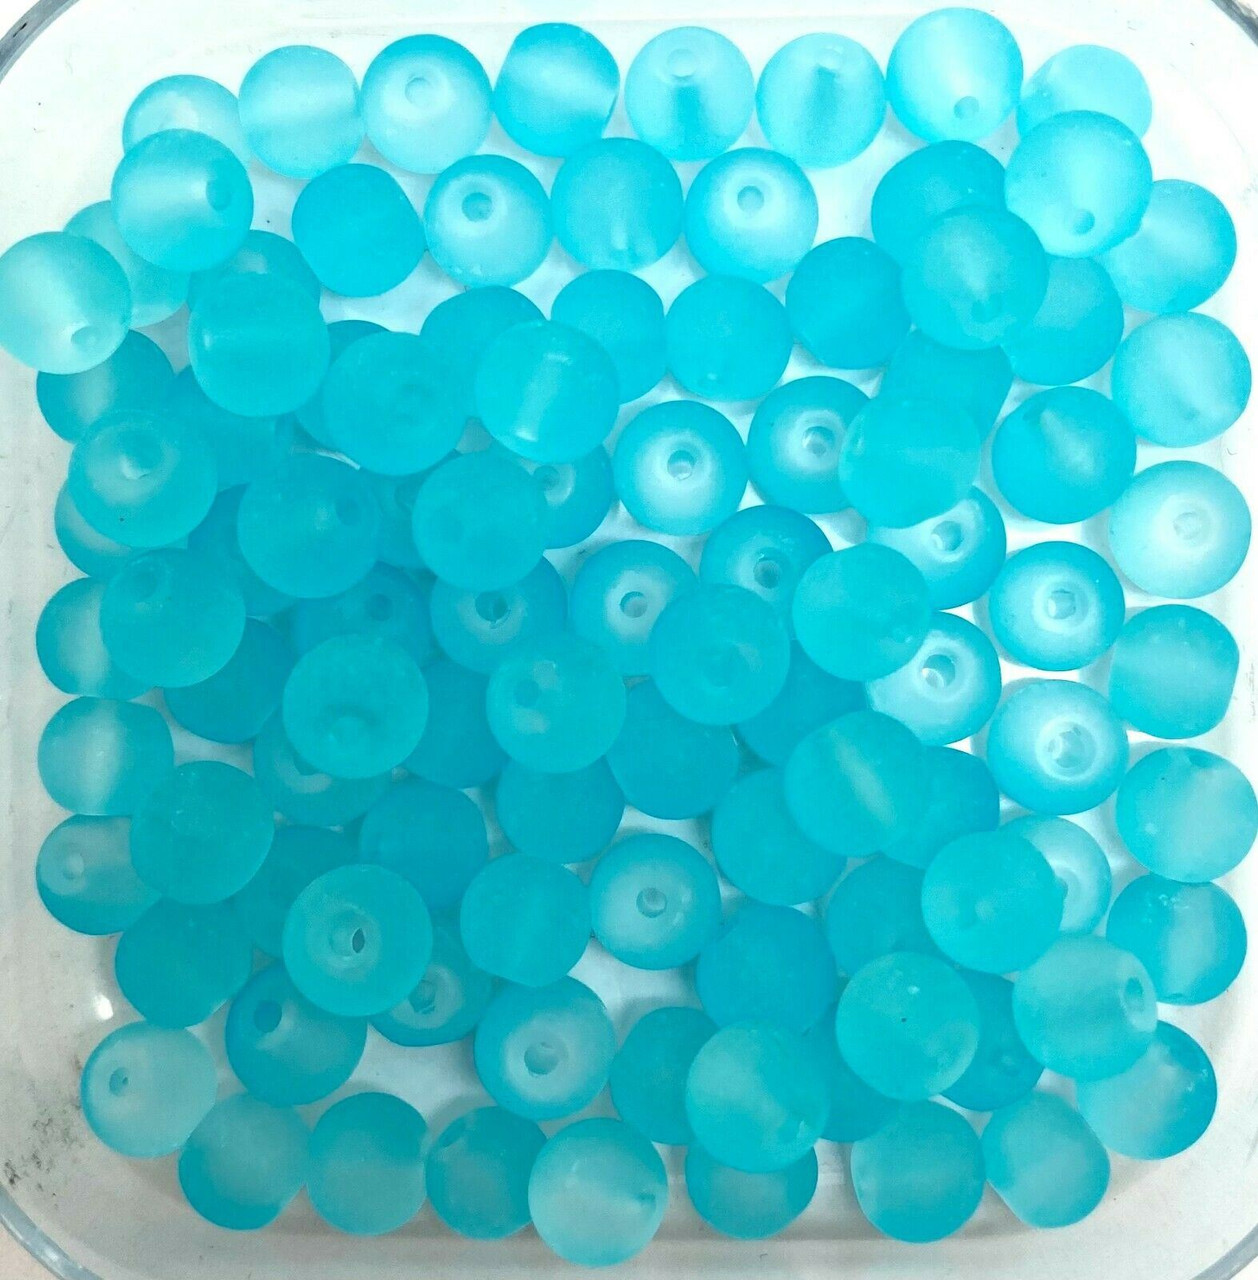 4mm Frosted Glass Beads - Turquoise, approx 200 beads